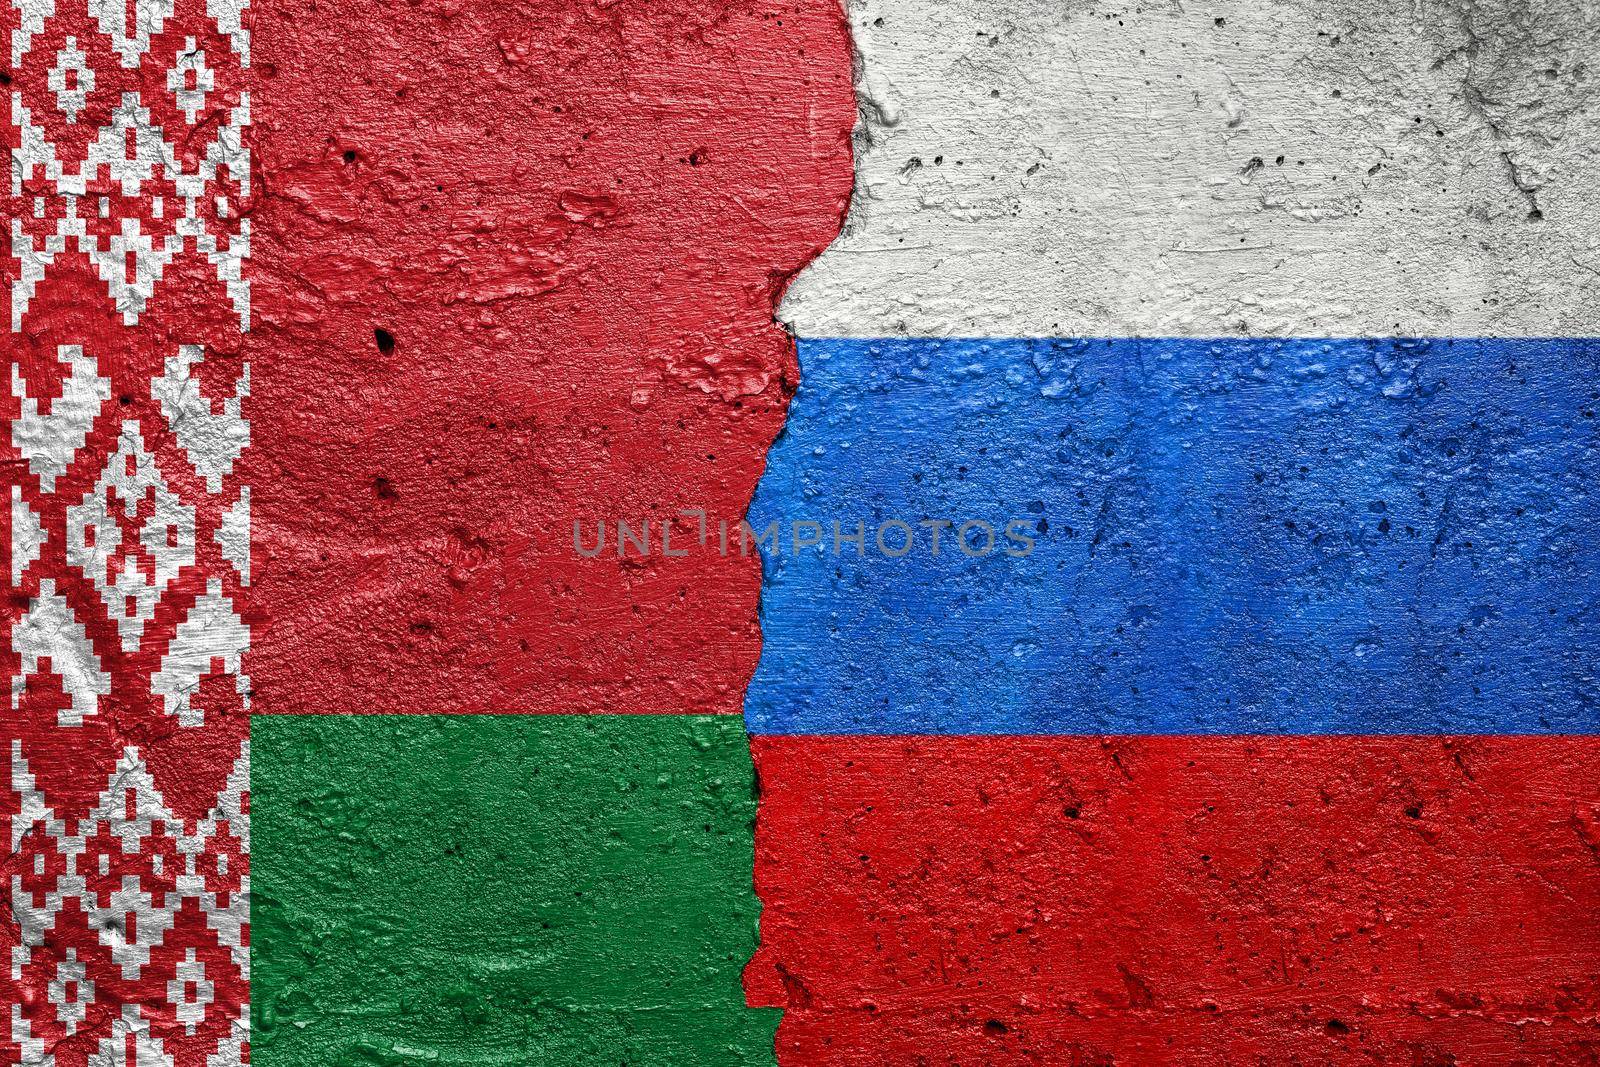 Belarus and Russia - Cracked concrete wall painted with a Belarusian flag on the left and a Russian flag on the right stock photo by adamr